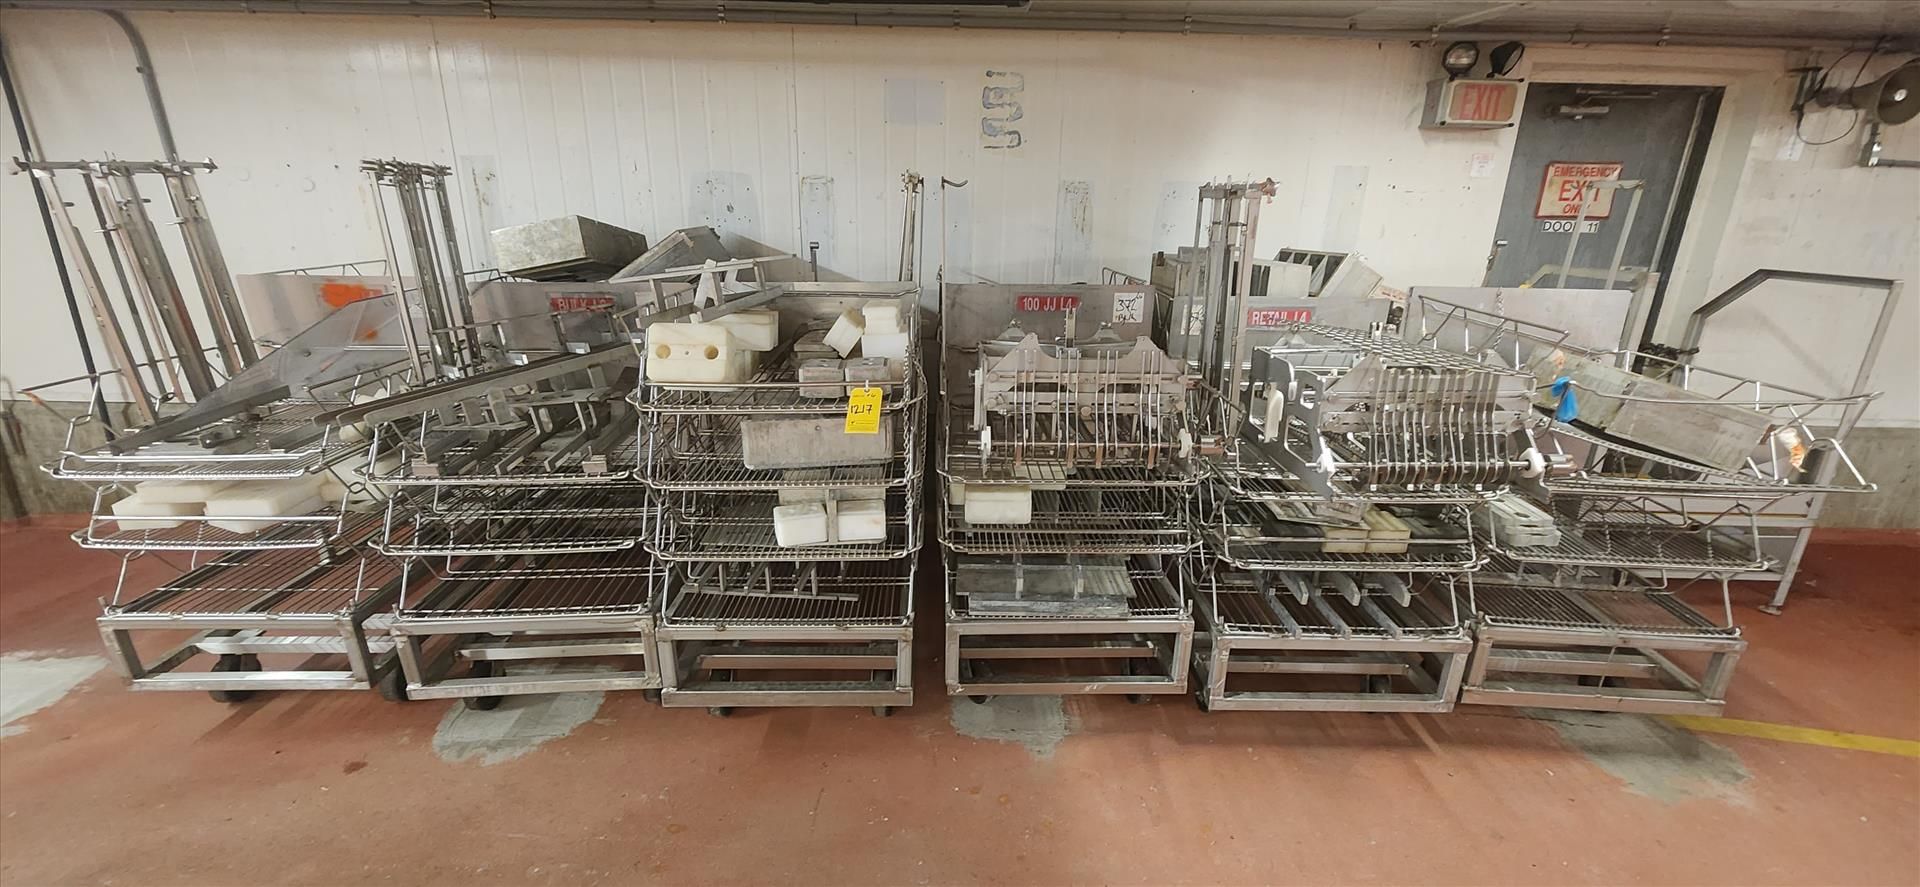 (6) parts carts, stainless steel c/w change parts [TAG 1217 - LOC Brockley Dr.] - Image 2 of 3